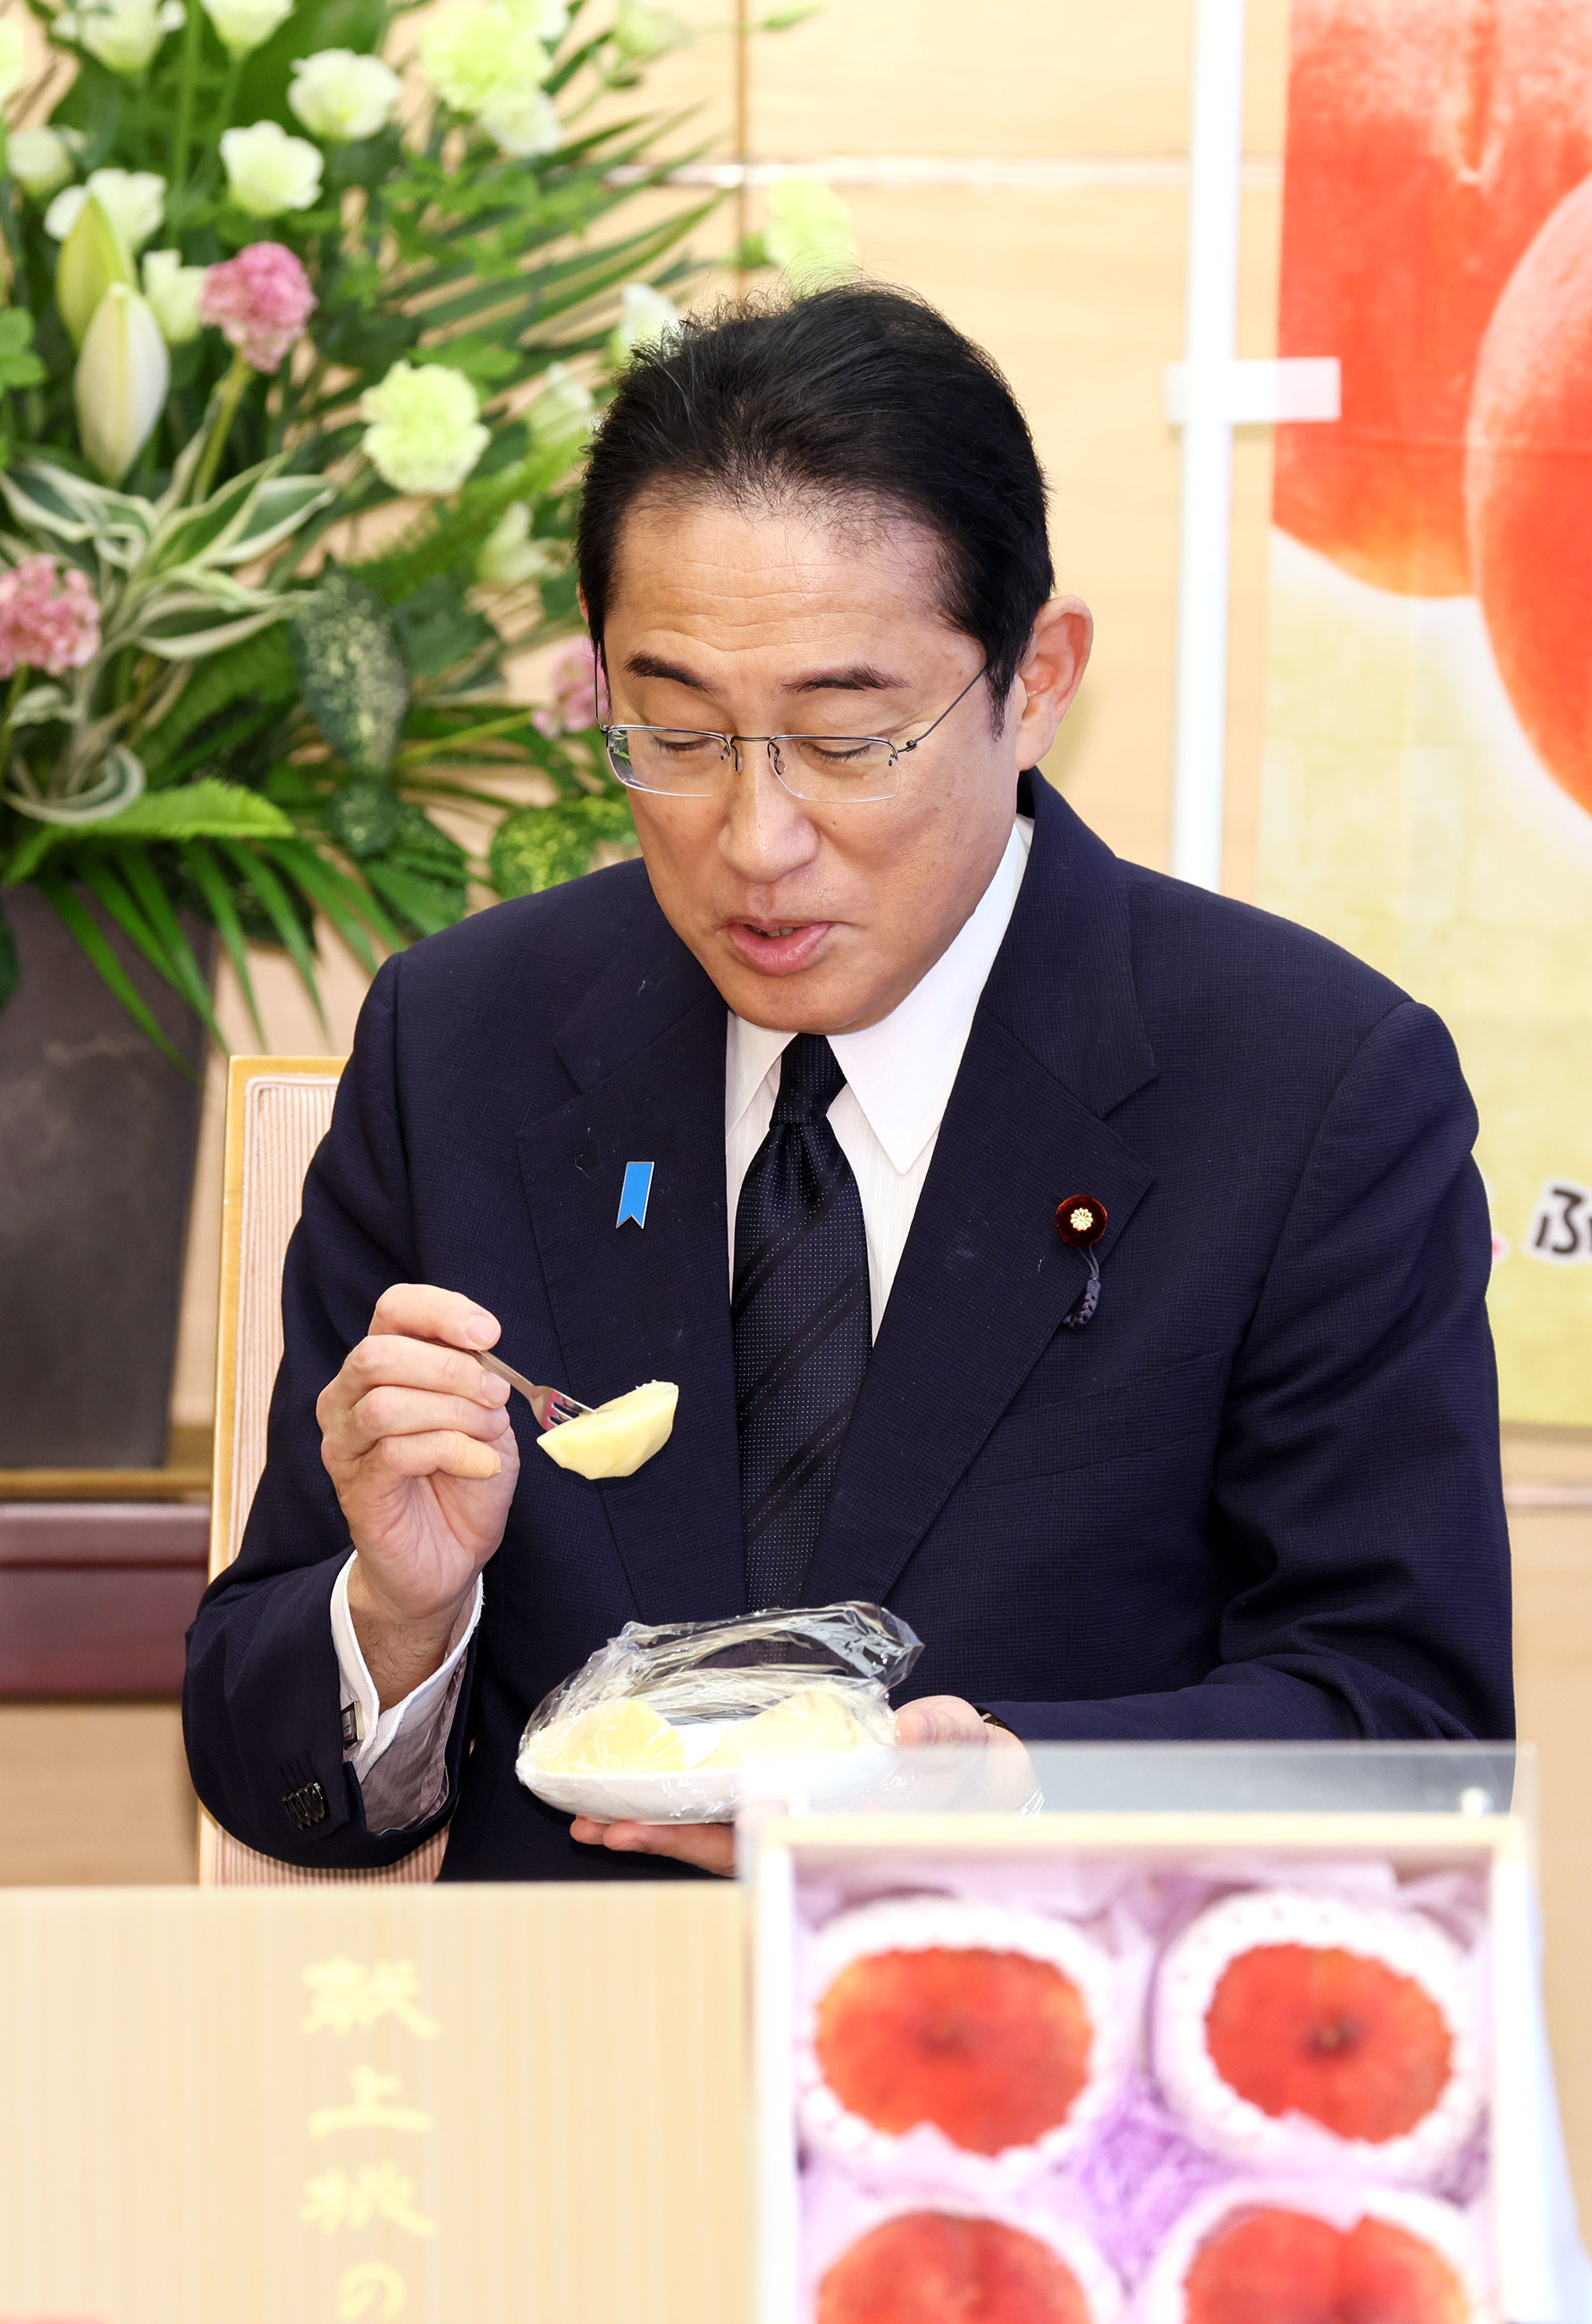 Prime Minister Kishida being presented with peaches (2)